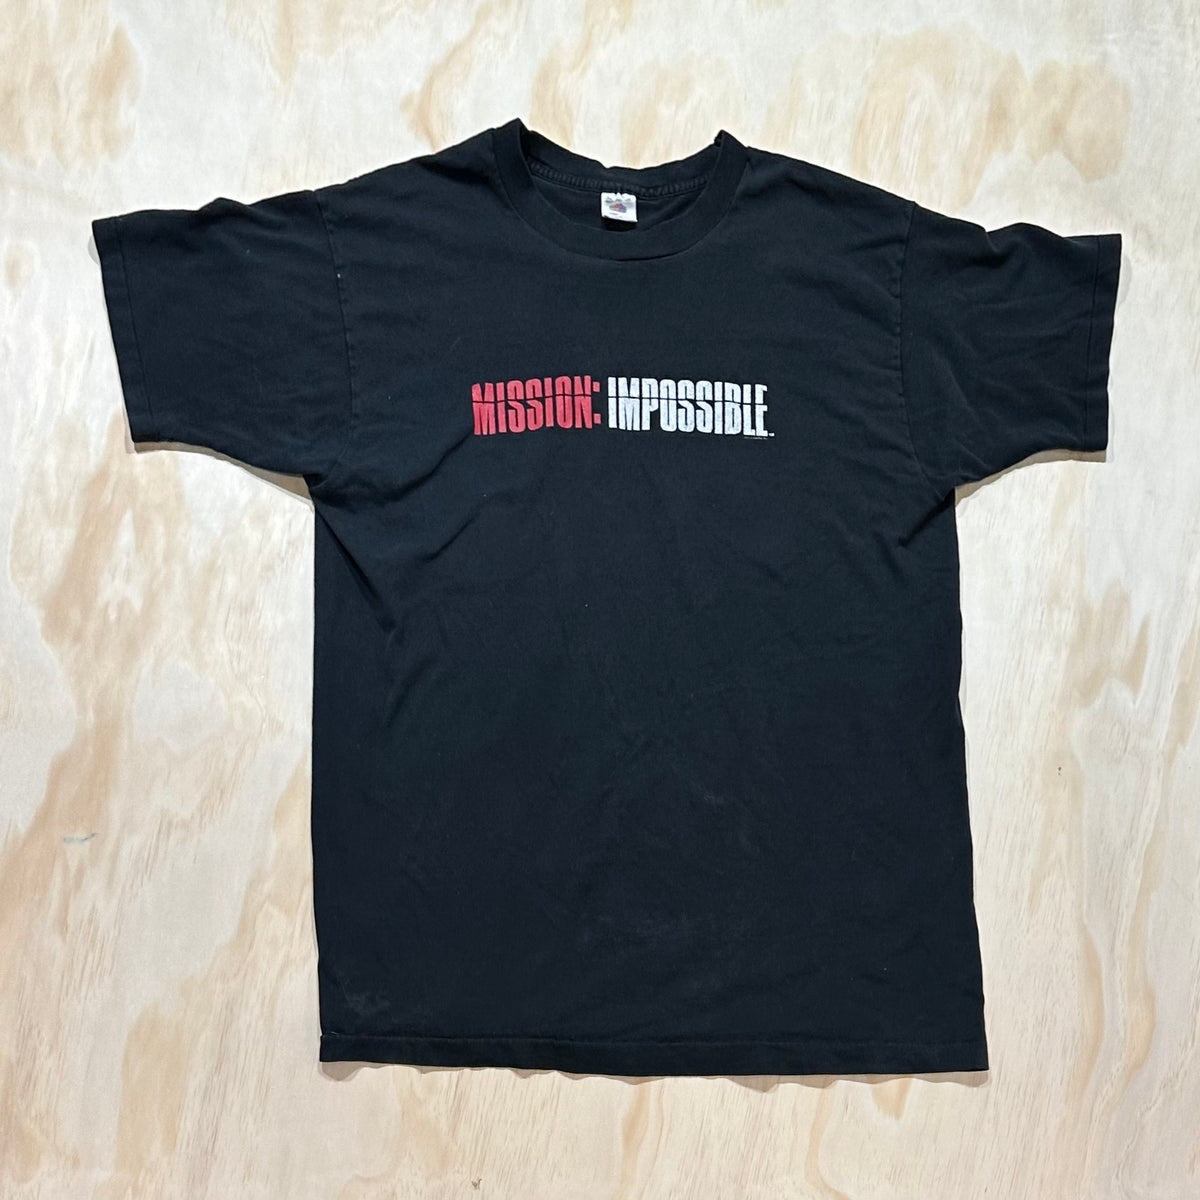 1996 Mission Impossible Tom Cruise movie promo shirt